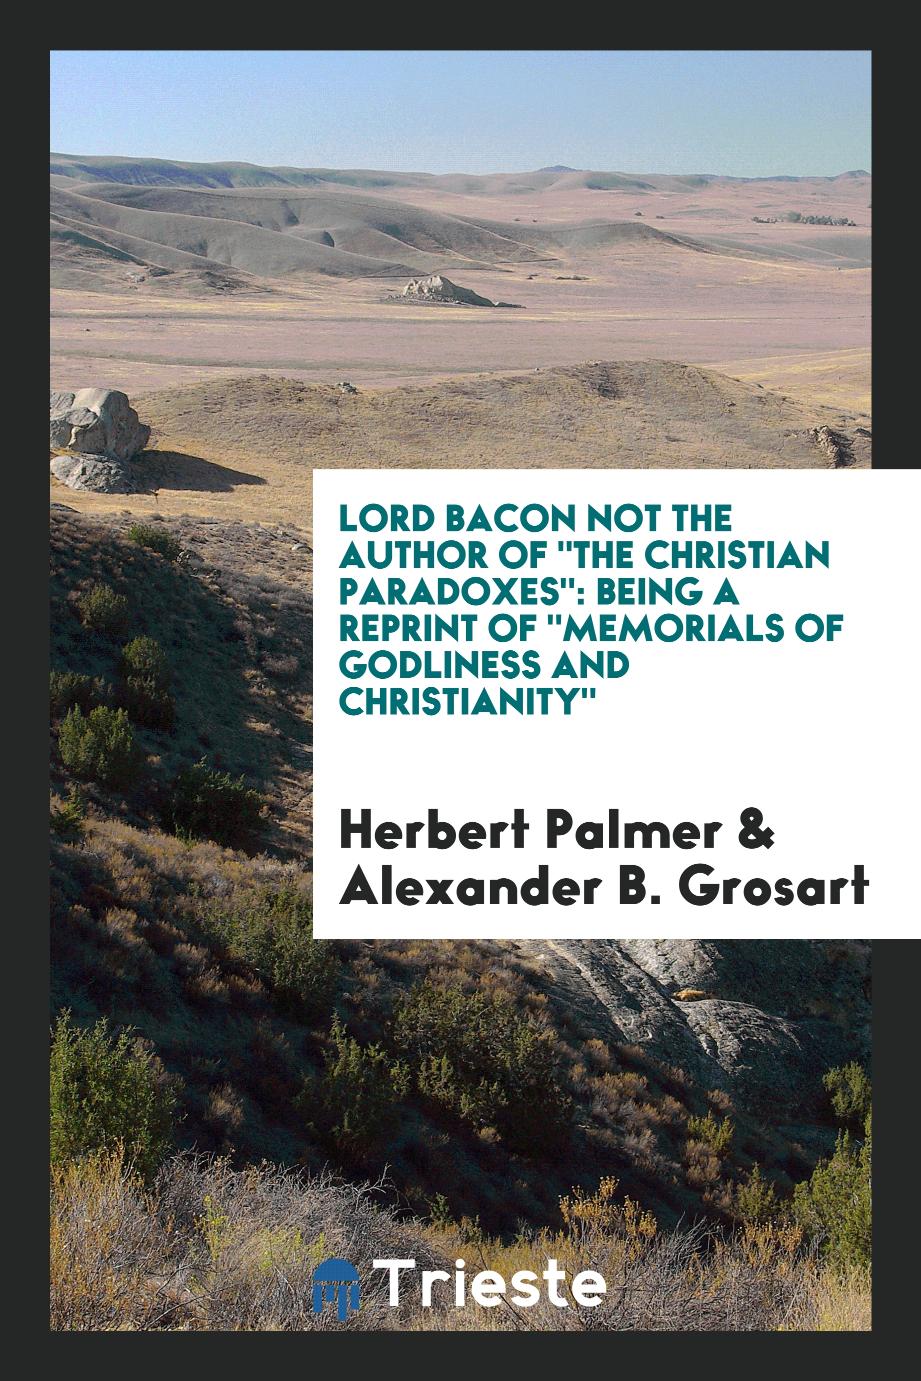 Lord Bacon Not the Author of "The Christian Paradoxes": Being a Reprint of "Memorials of Godliness and Christianity"